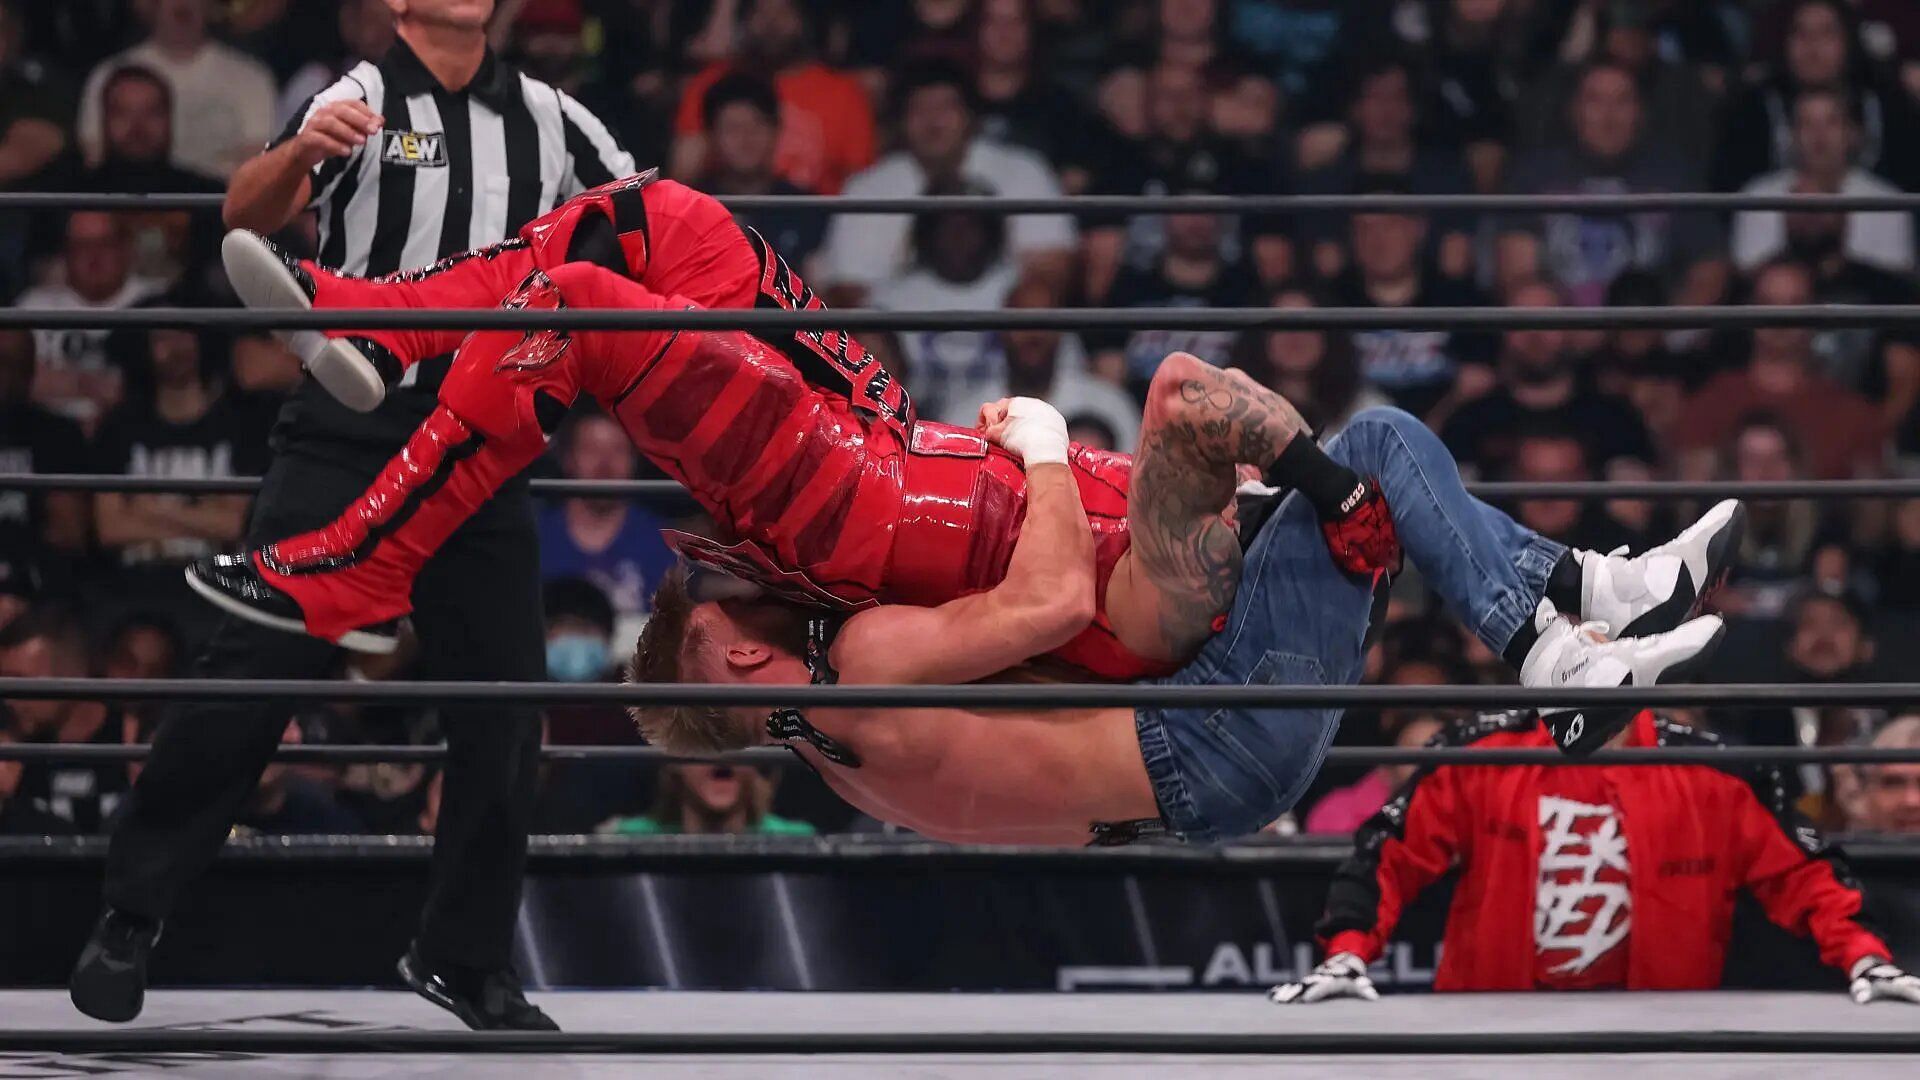 AEW star completely blacked out after dangerous spot on Dynamite